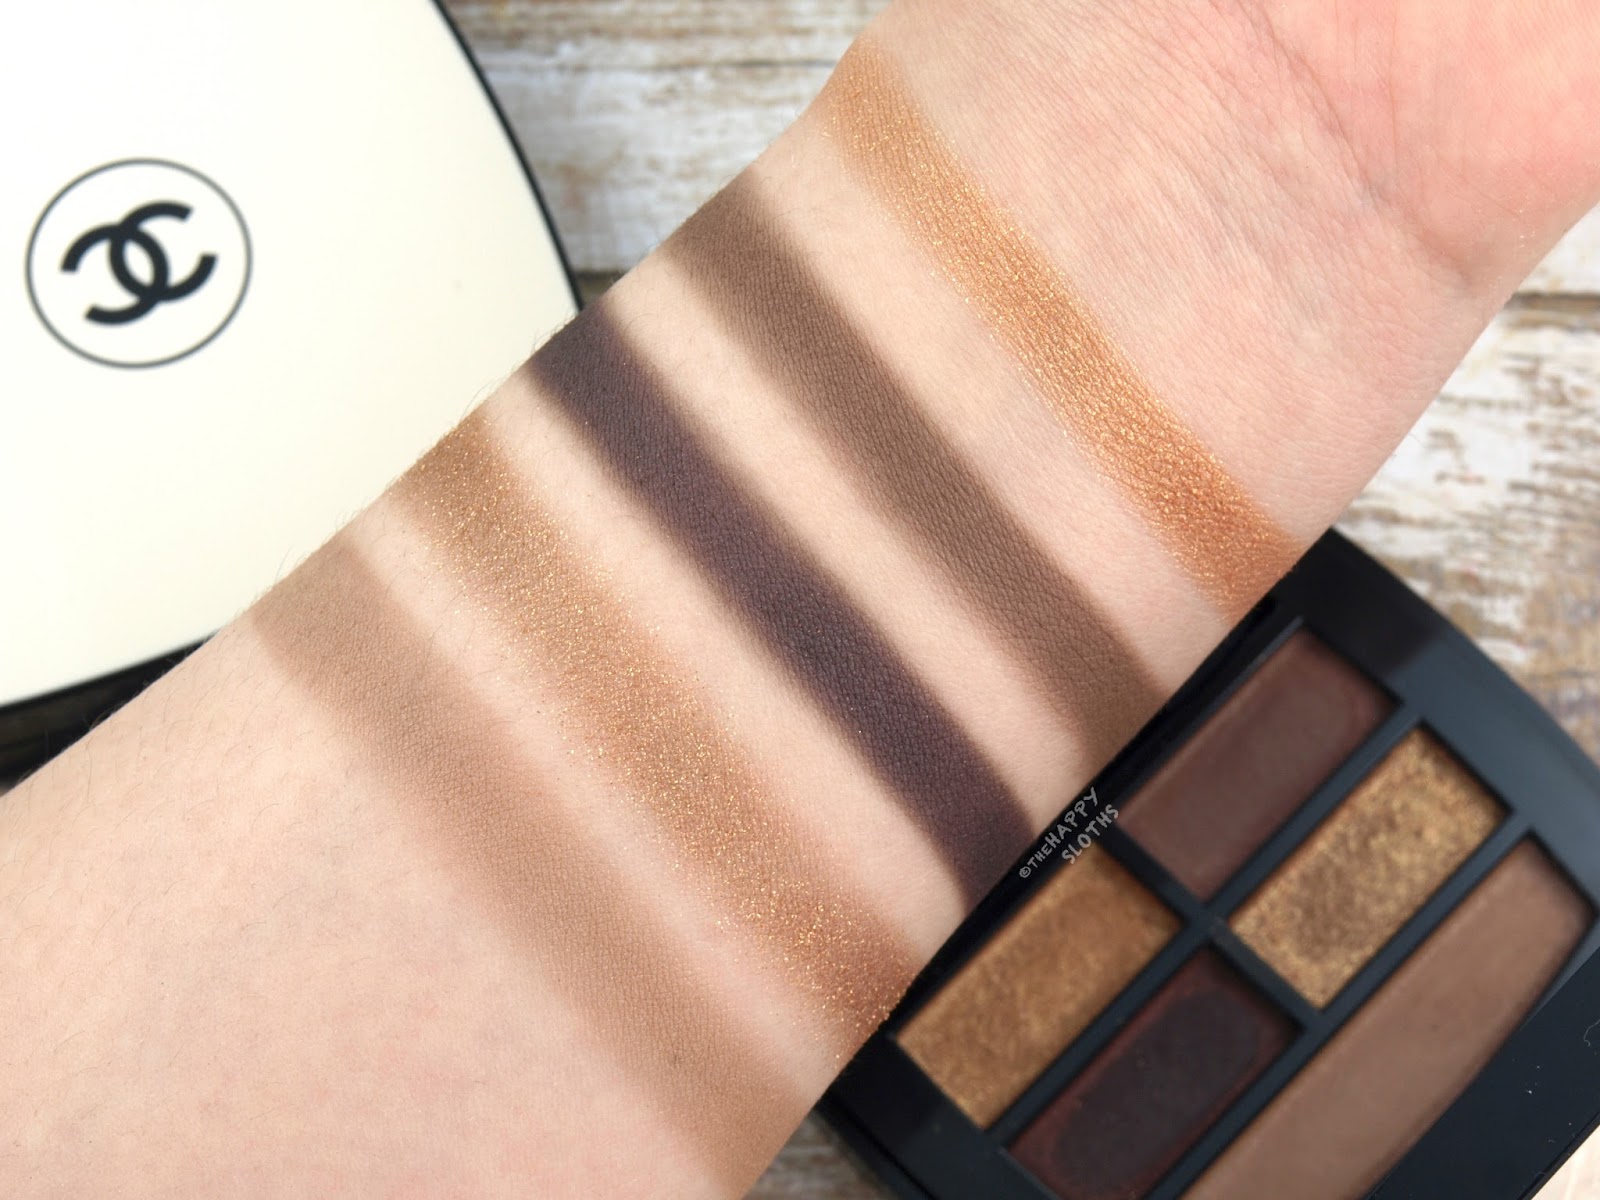 Chanel Les Beiges Healthy Glow Natural Eyeshadow Palette in "Deep": Review and Swatches